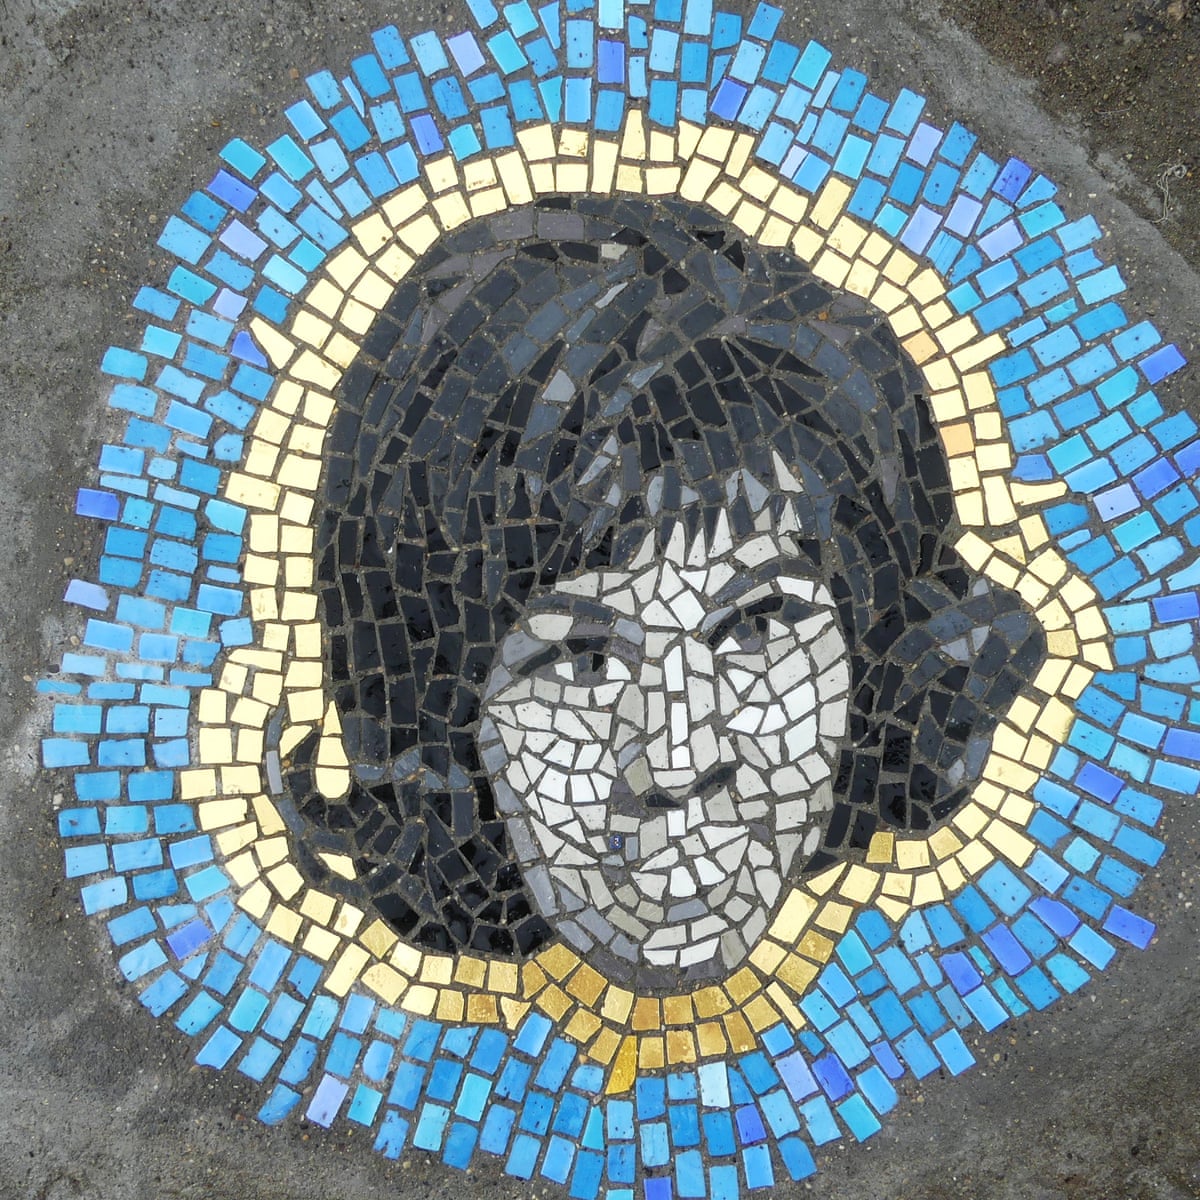 Street art: the mosaic maker who turns potholes into pictures | Cities | The Guardian